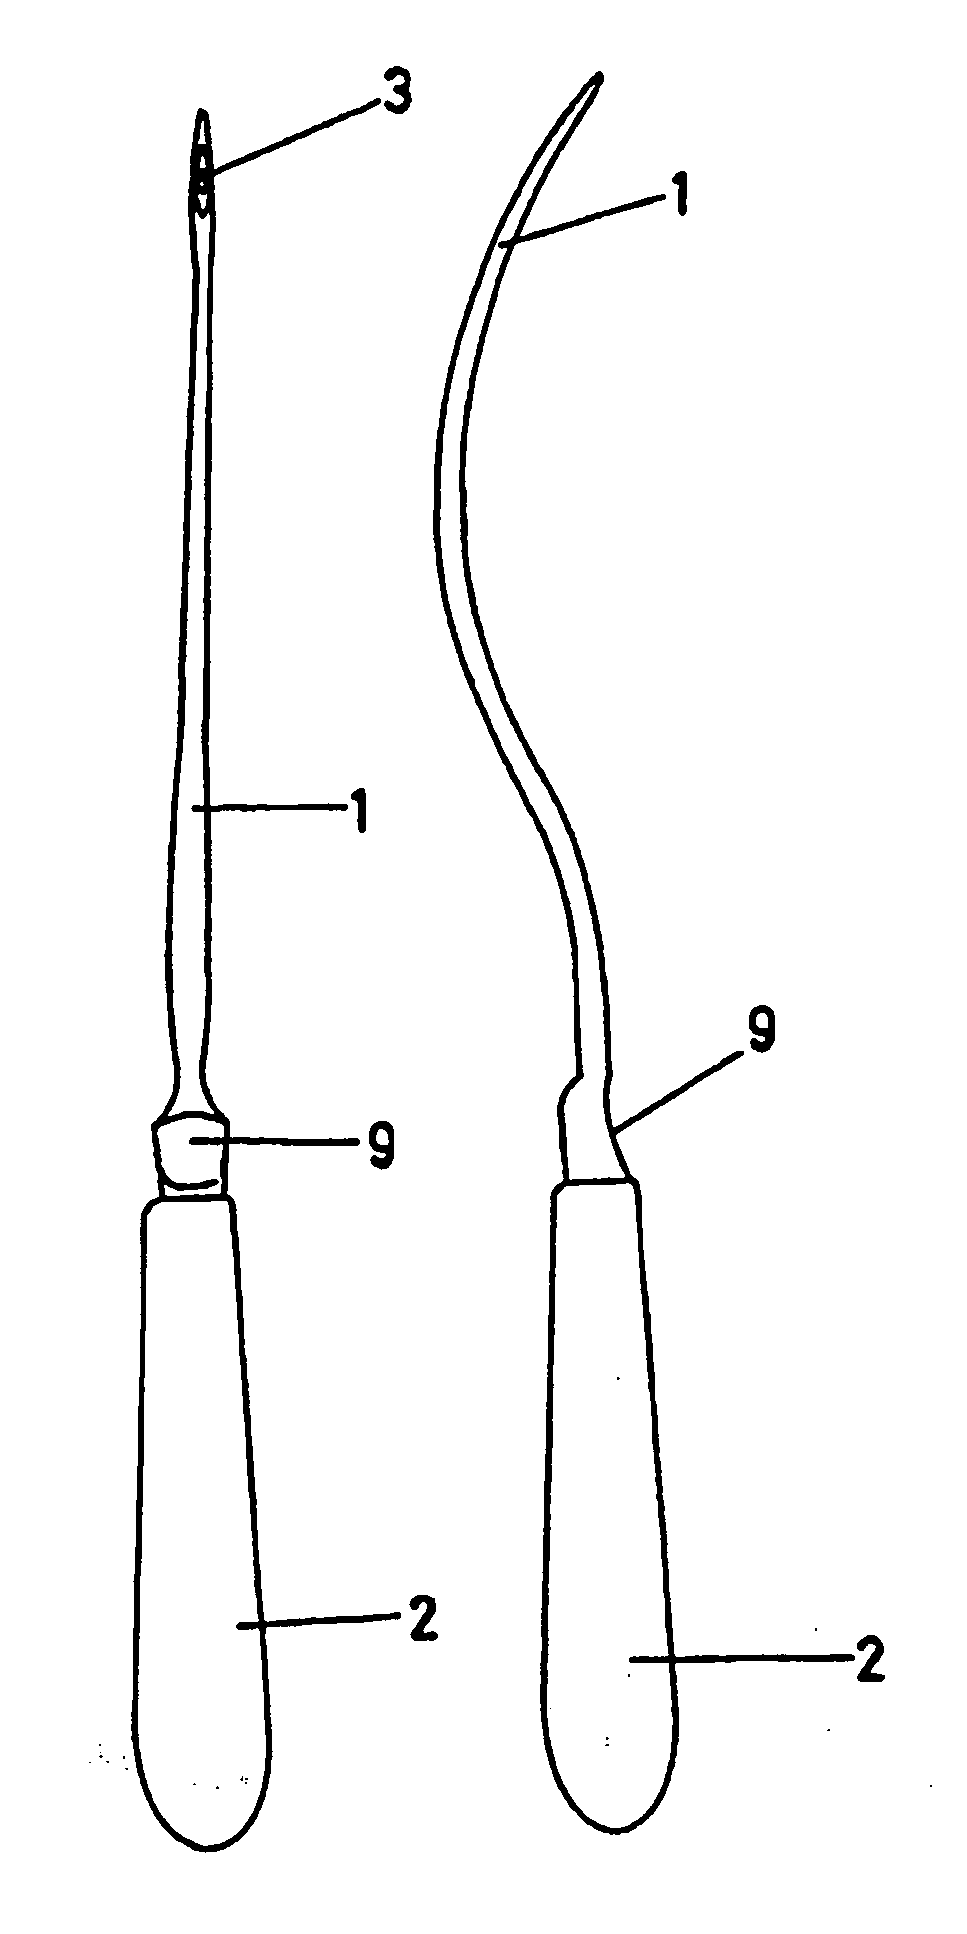 System for the treatment of stress urinary incontinenc